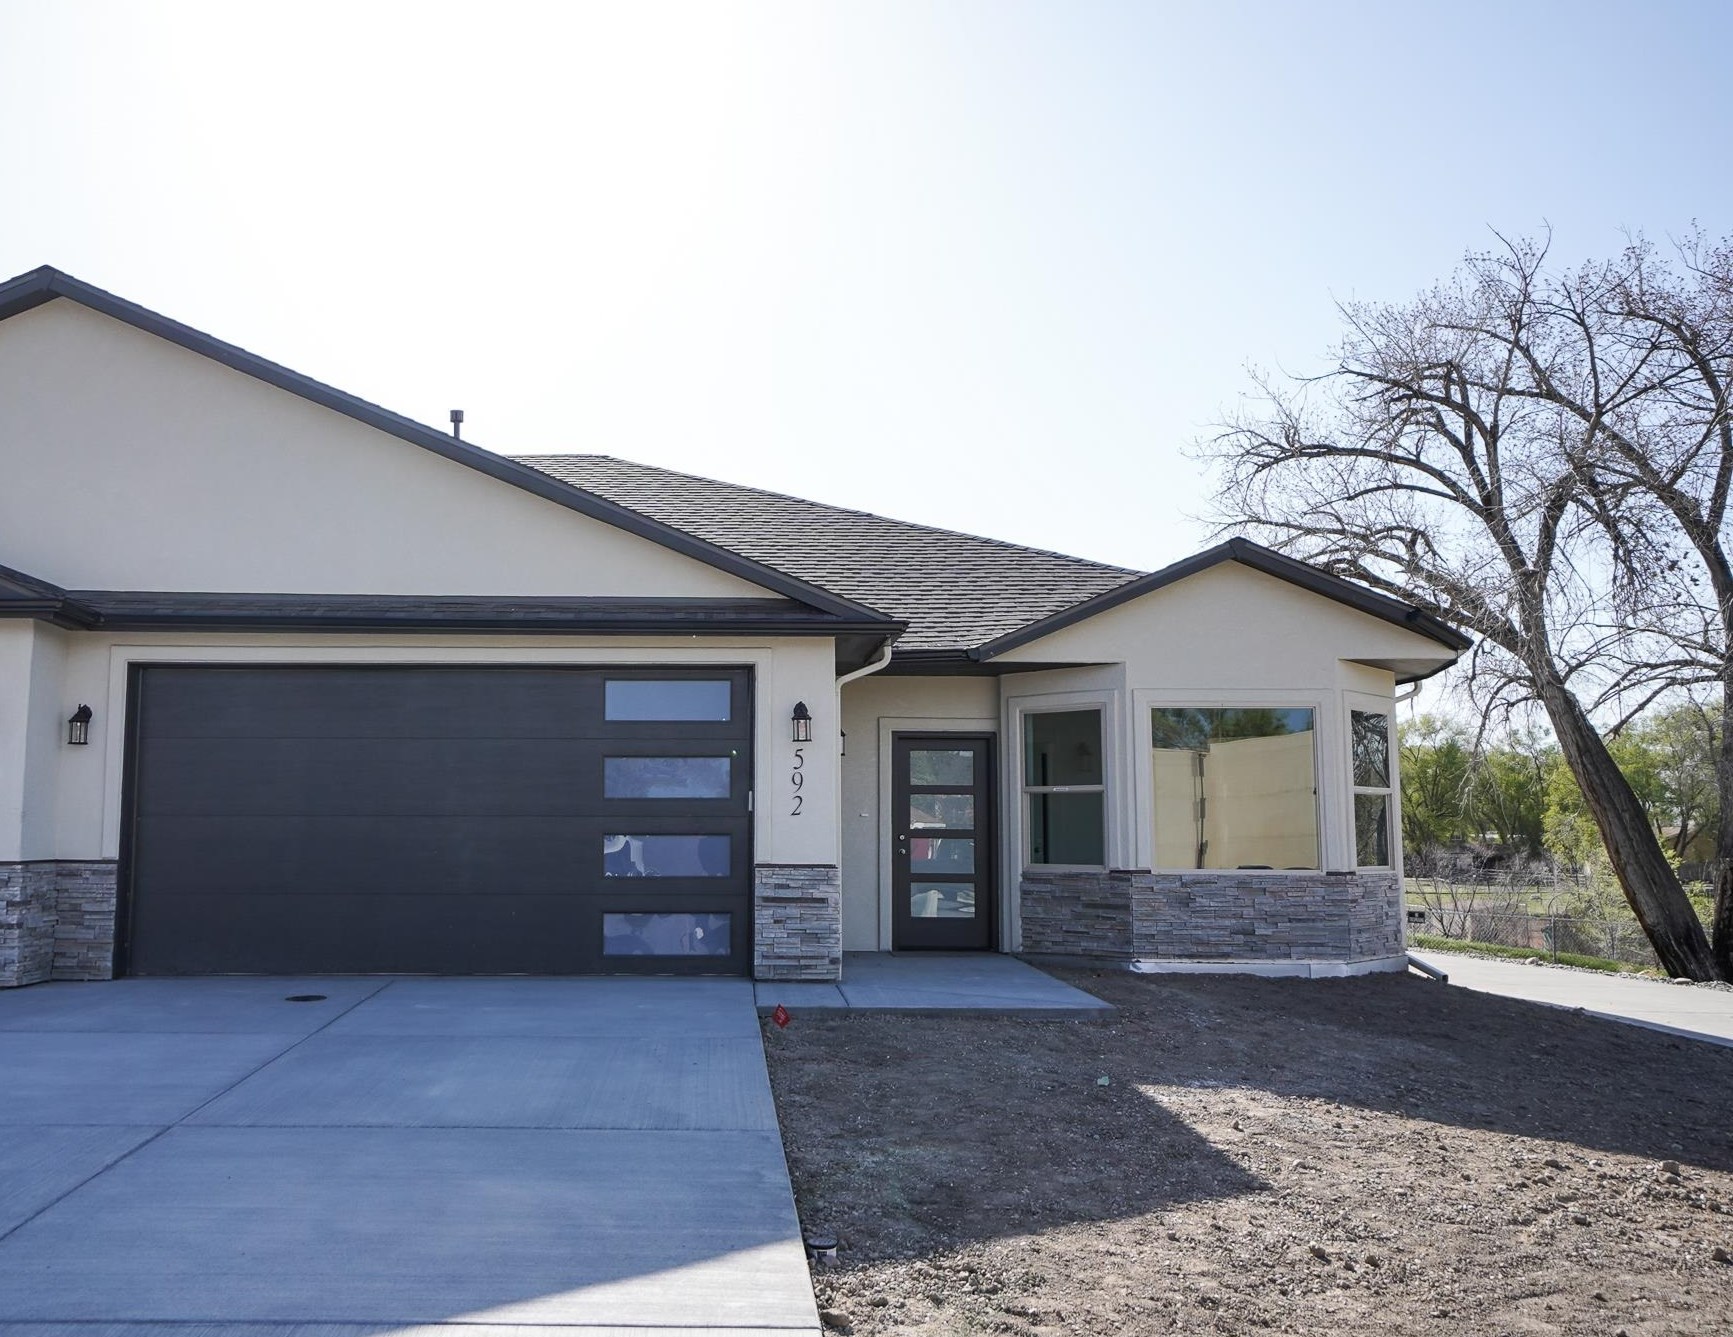 New construction in desirable Fruita. Lock and leave townhomes are fully landscaped and fenced, and the HOA maintains landscaping for just $75 per month. These townhomes are adjacent to a 22 mile paved walking path that connects with a state park and biking trails. The home includes a spacious granite island and open concept in the common space. The master en suite features a fully tiled shower with dual showerheads and a euro glass door. The second bedroom is highlighted by natural light from the front  Bay windows, and is adjacent to the full bathroom with a tiled shower and bathtub. Storage and built-in bench are abundant for a home of the size. The home is efficient with 2 x 6 construction and an excellent place to call home. Buyer to verify all information.